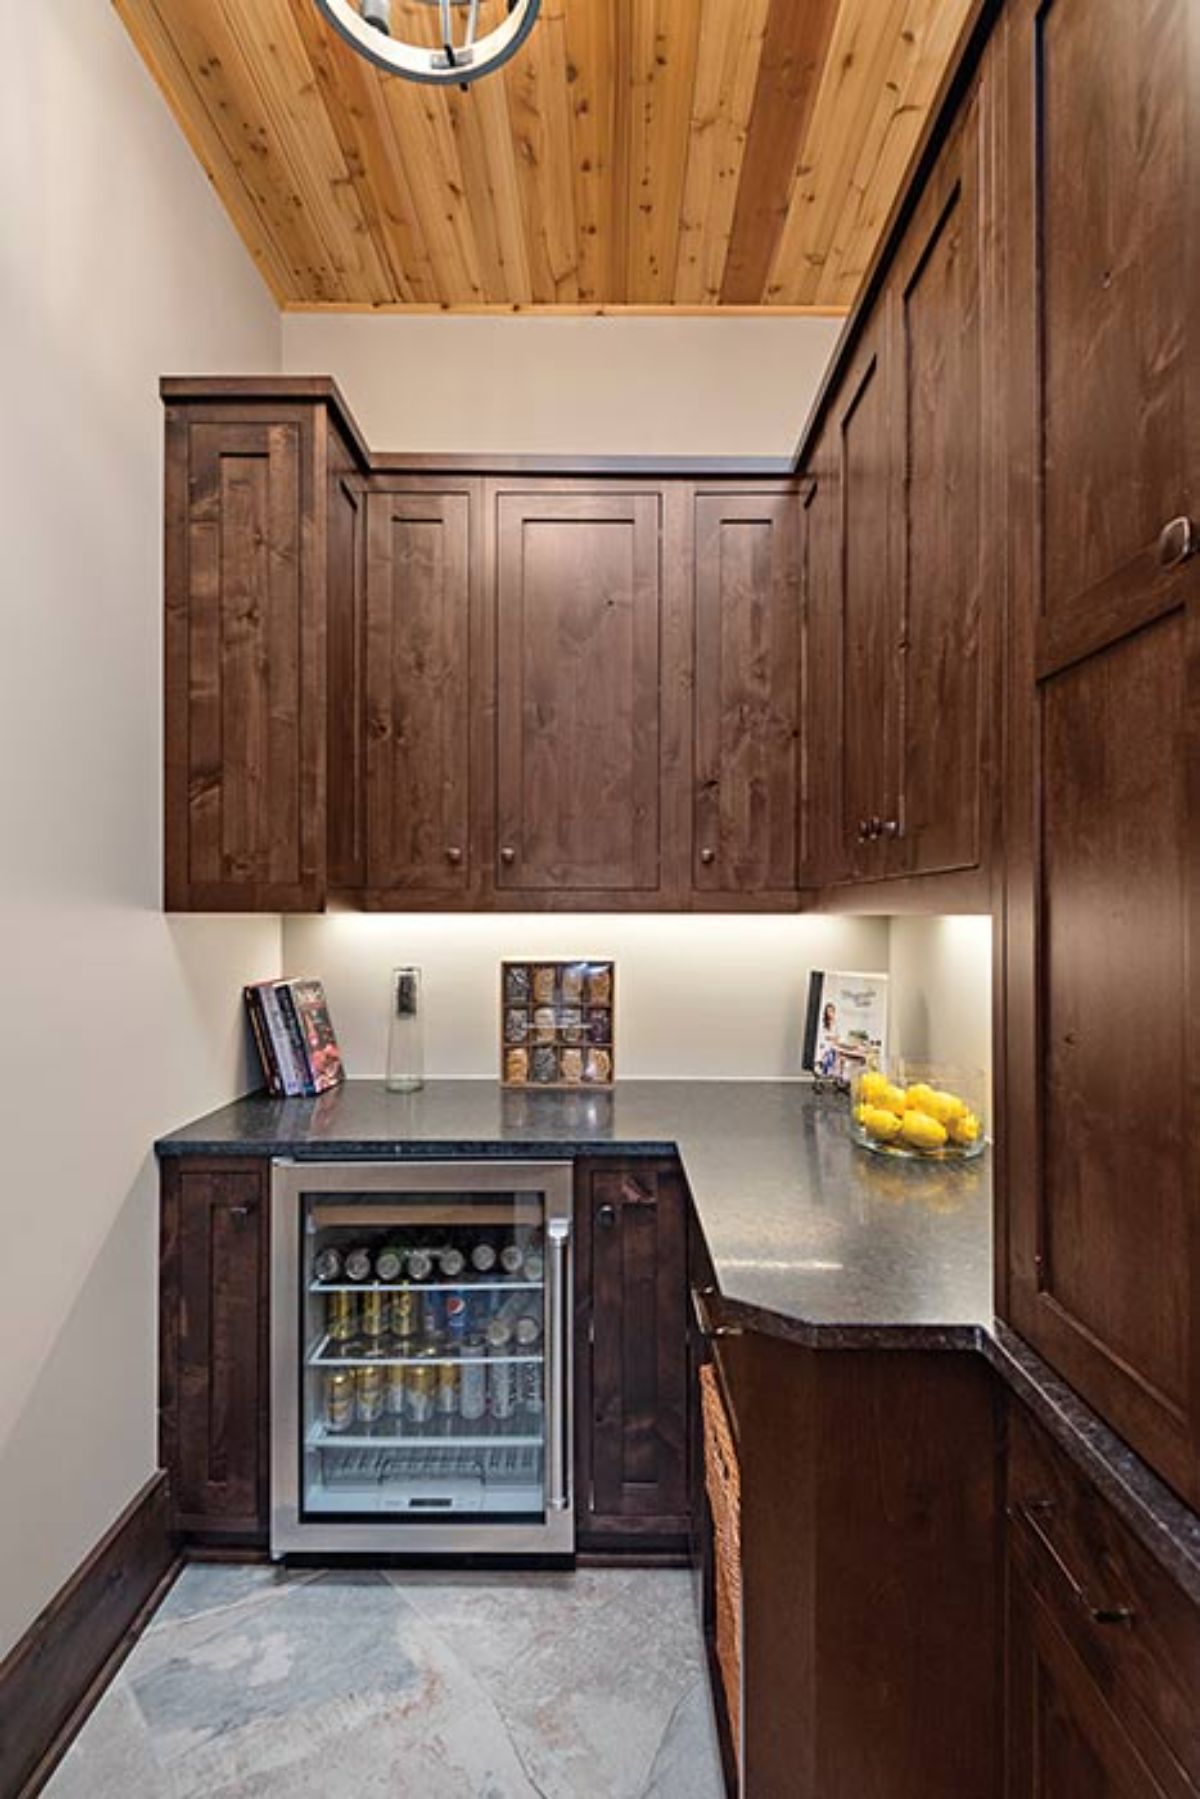 wine fridge at back wall of pantry with dark wood cabinets and white walls